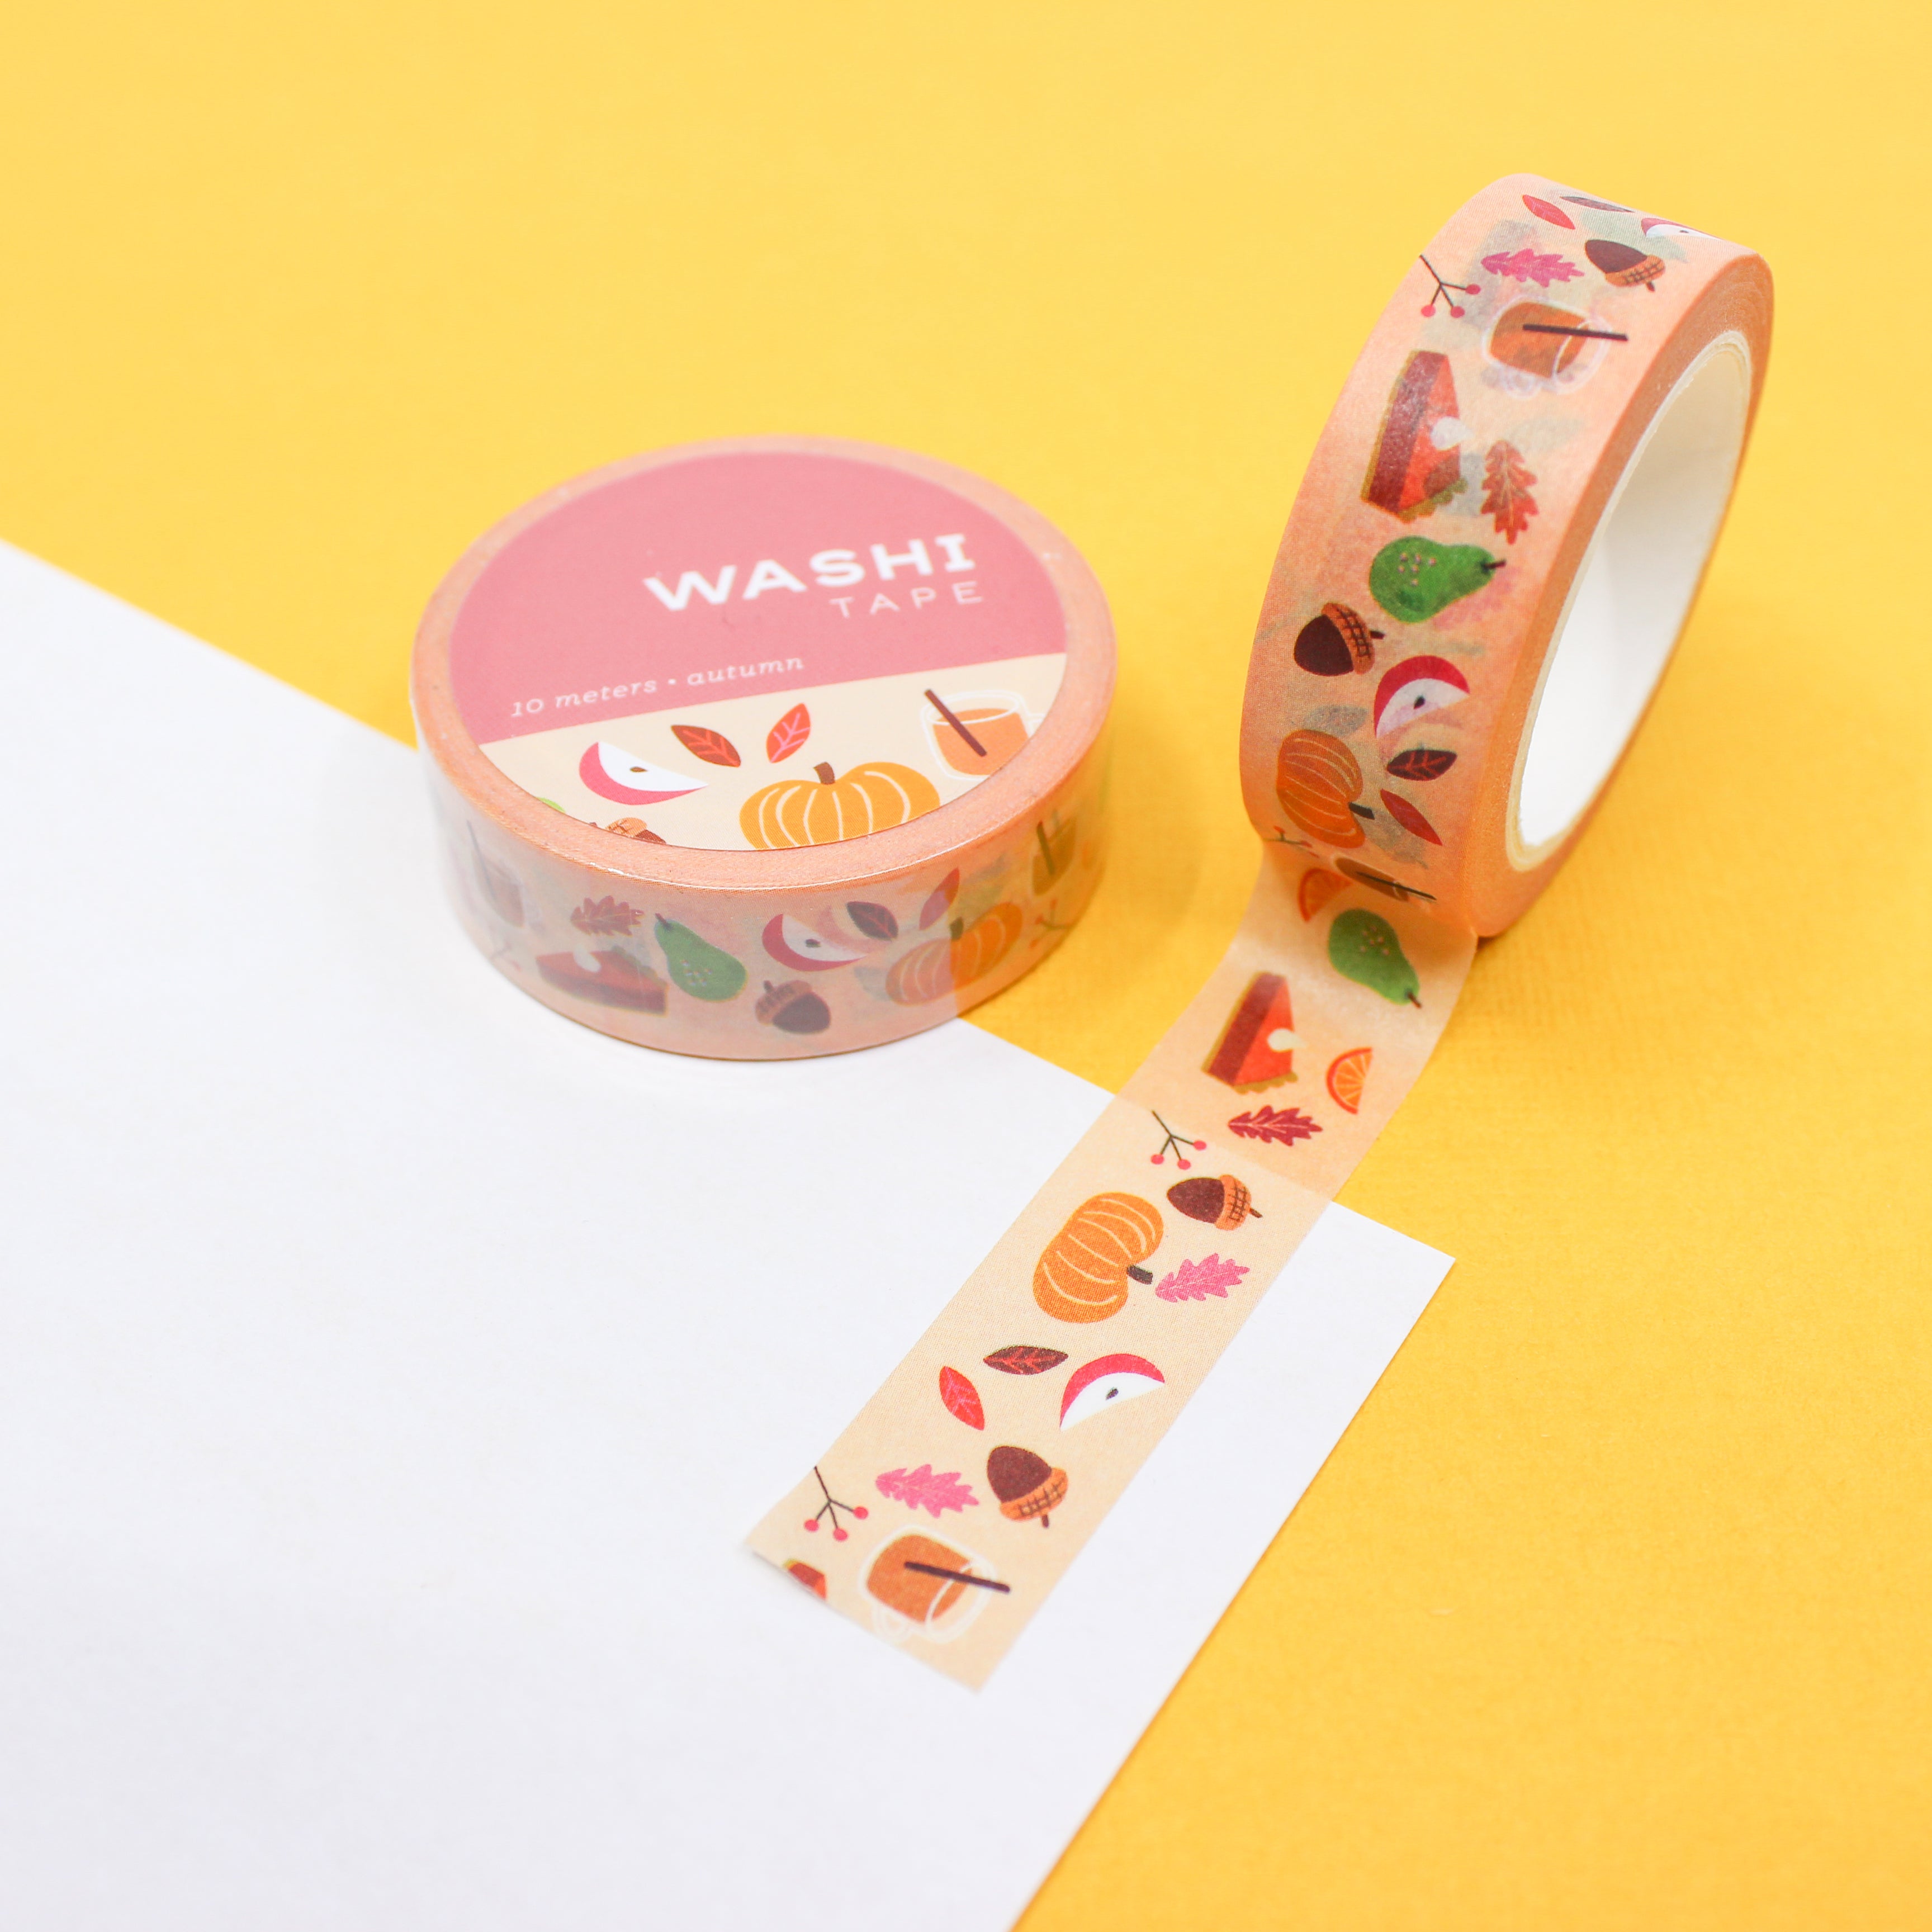 This tape is fun fall symbols of pumpkin themed items such as, pumpkin spice latte, pumpkin pie, fall leafs, apples, and fall fruit washi tape. It is great addition to your Thanksgiving holiday spread.